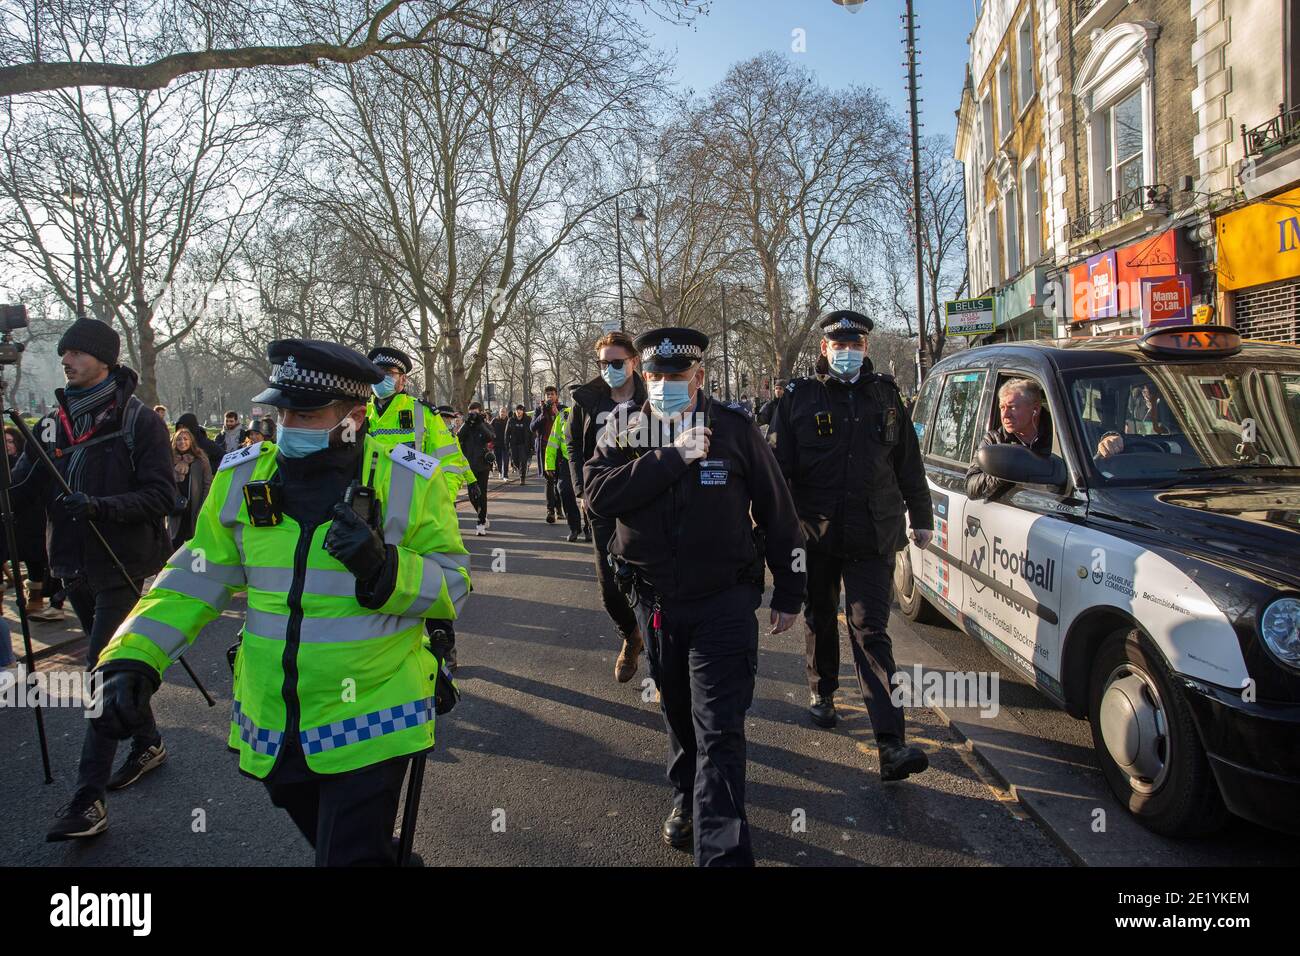 Lockdown protesterand Police on Clapham Common during the anti-lockdown demonstration on January 9, 2021 in London, England.StandUpX are demonstrating. Stock Photo